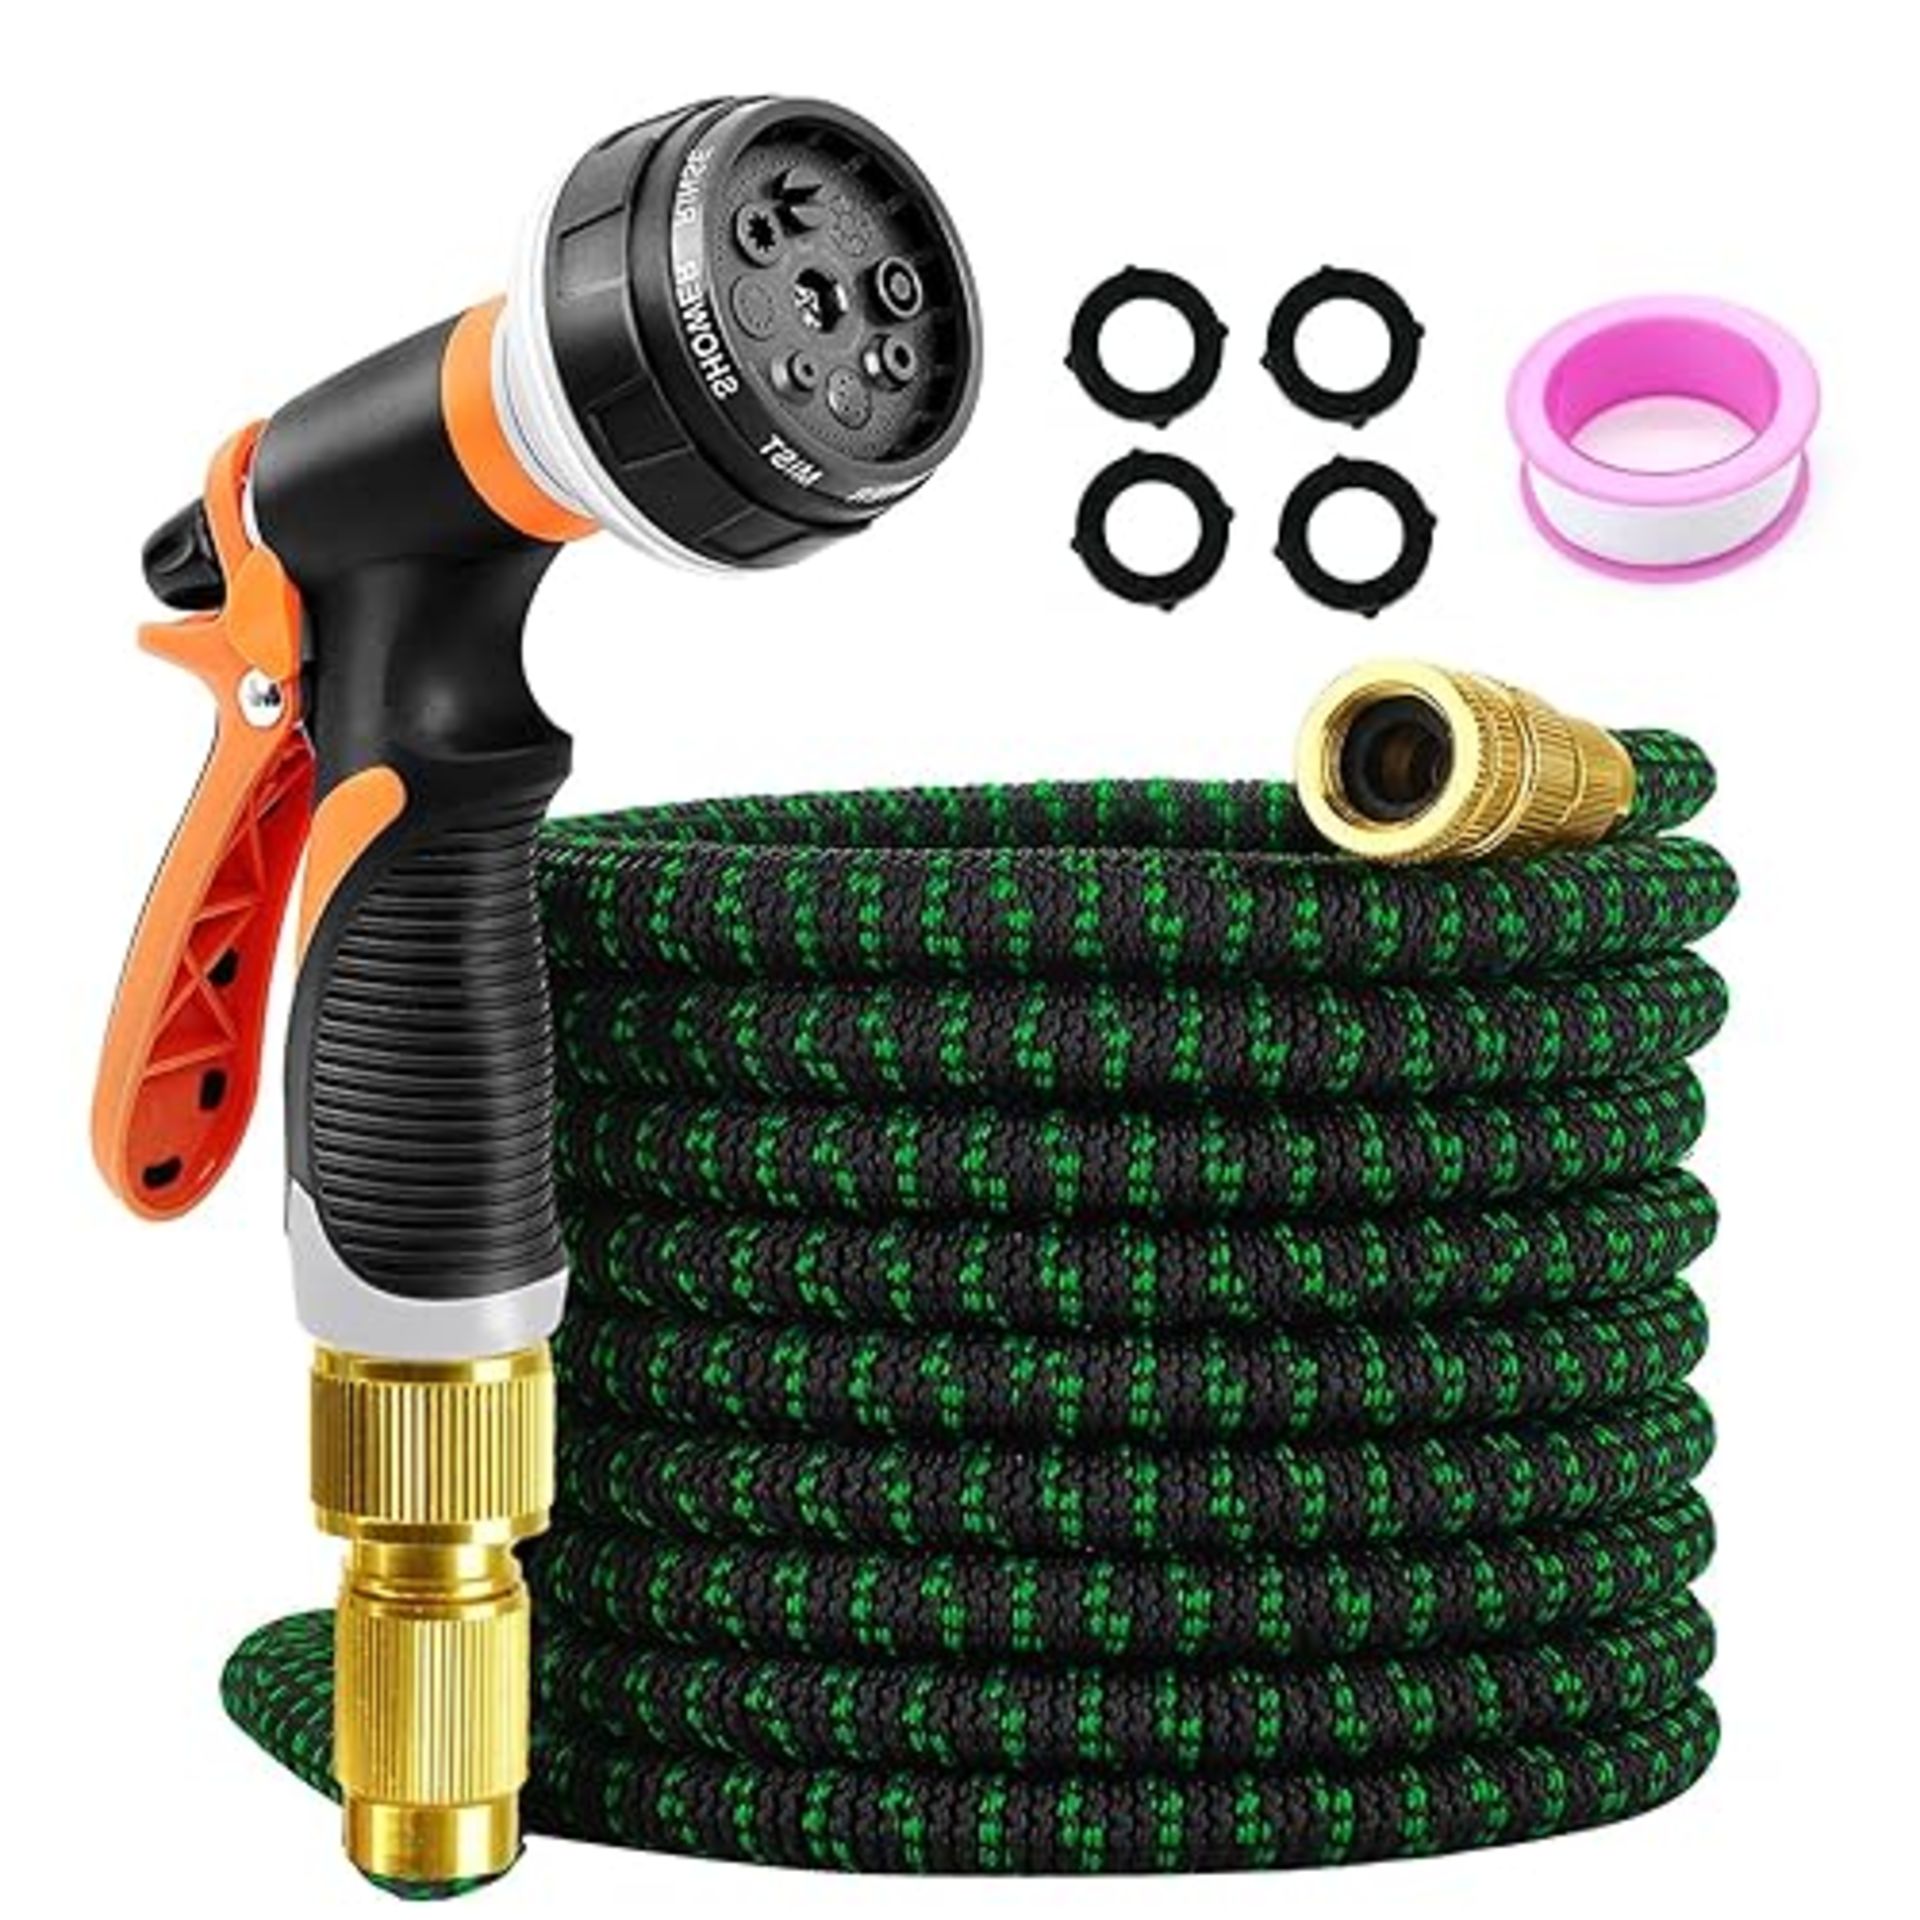 Expandable Garden Hose Water Pipe, 50FT/15M Flexible Water Hose with 8 Function Spray Nozzle, Expan